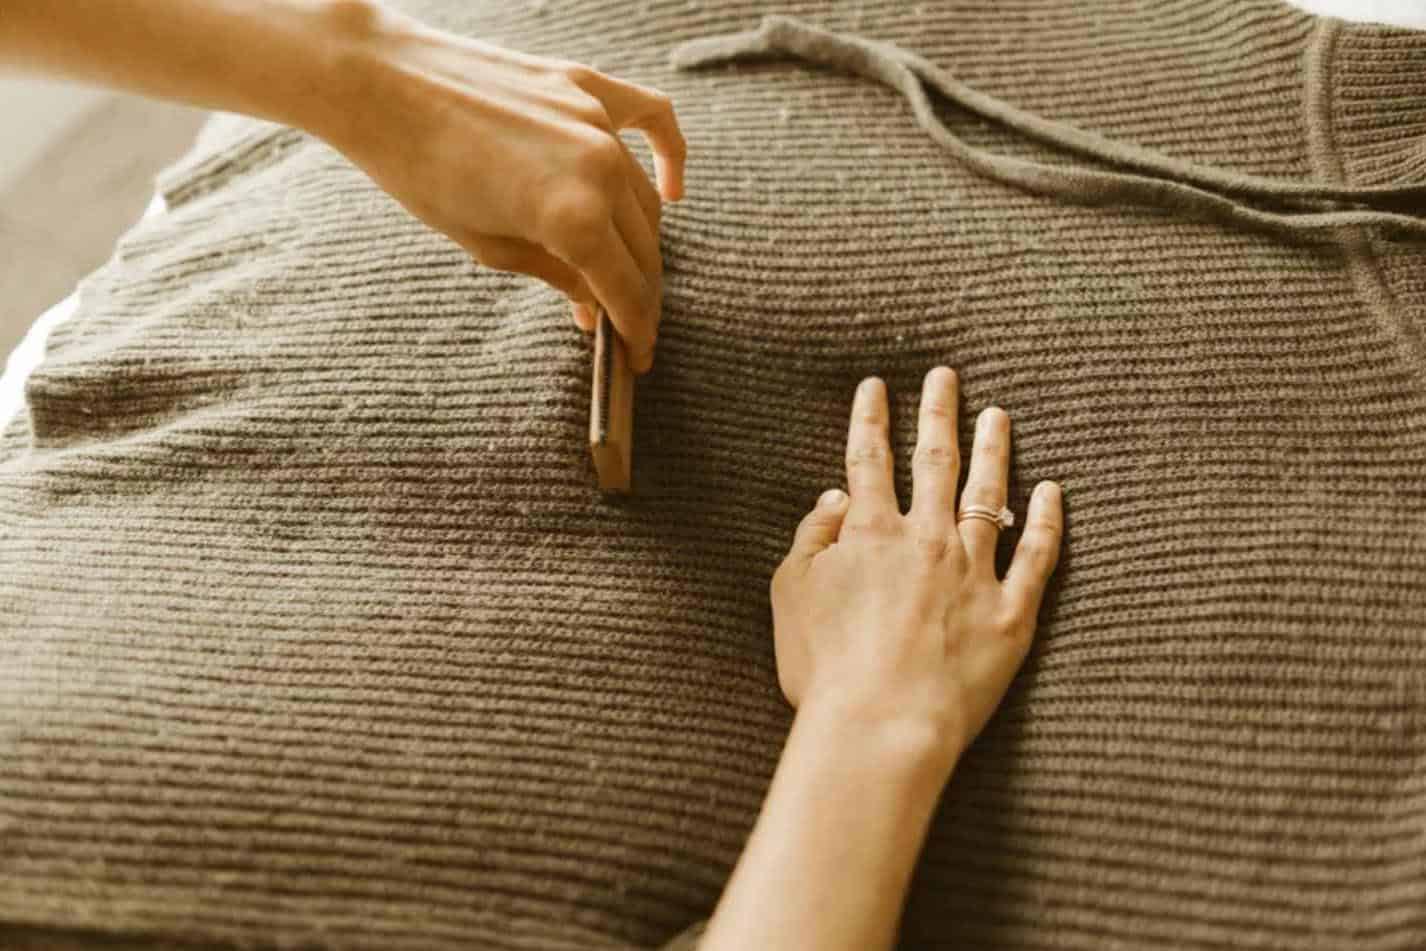 How to remove stains on a cashmere sweater